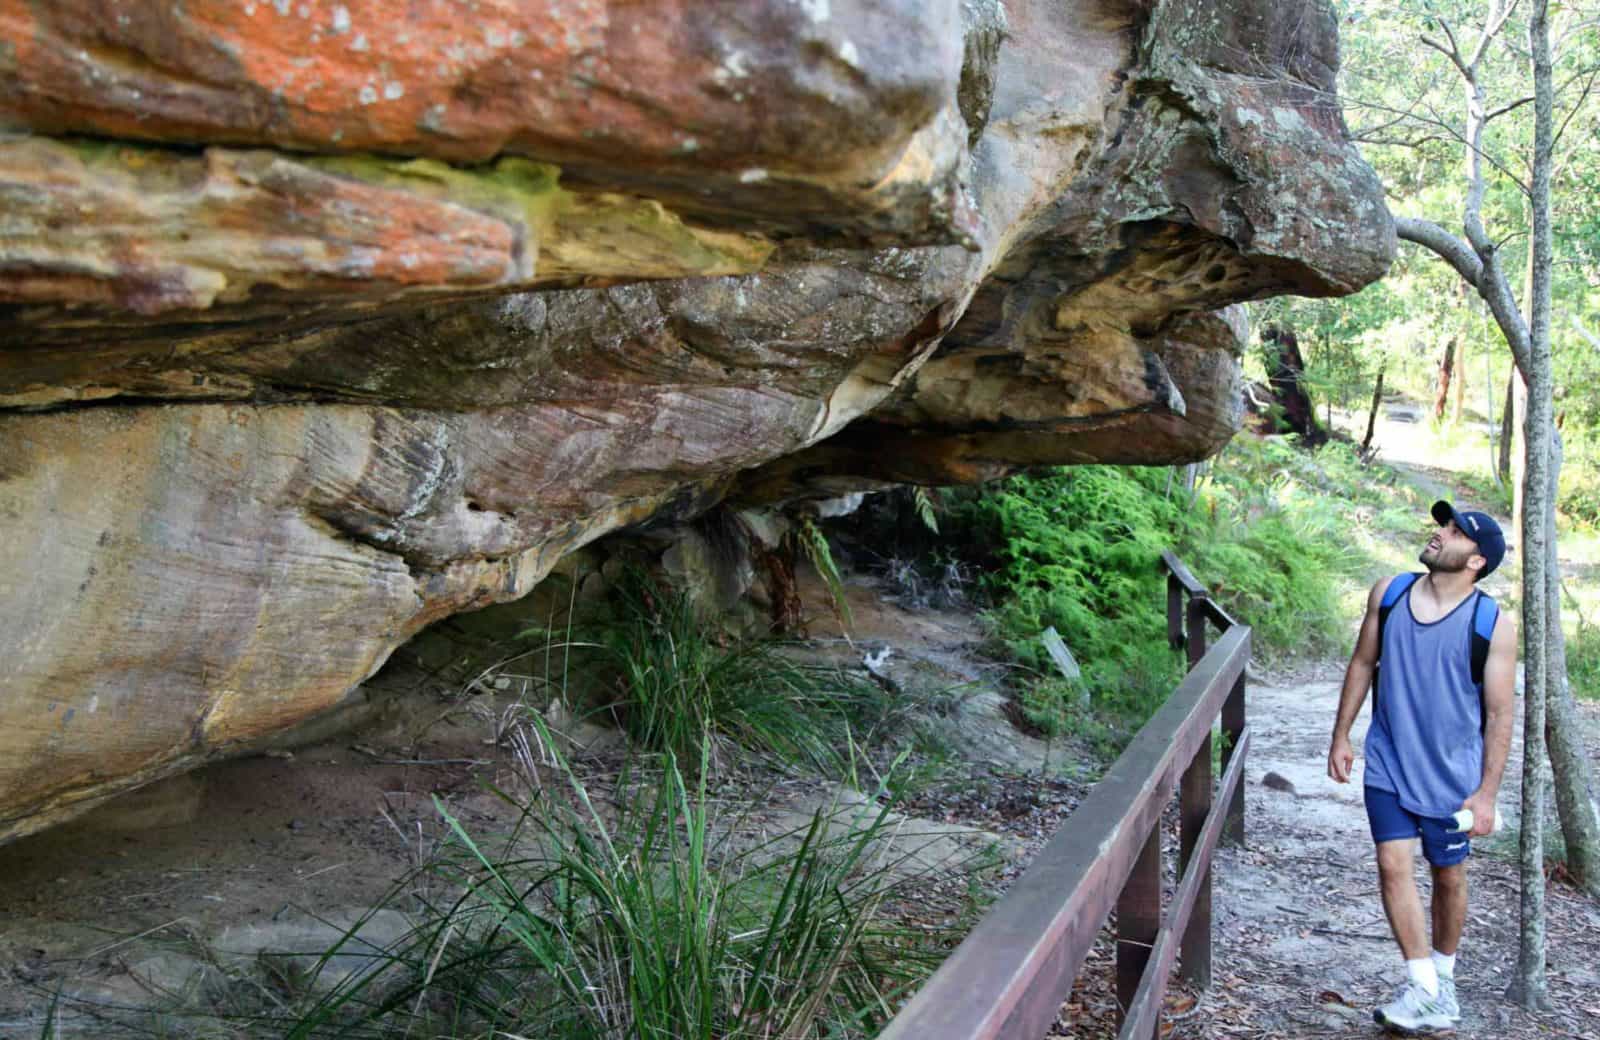 Red Hands Cave, Ku-ring-gai Chase National Park. Photo: Andy Richards/NSW Government